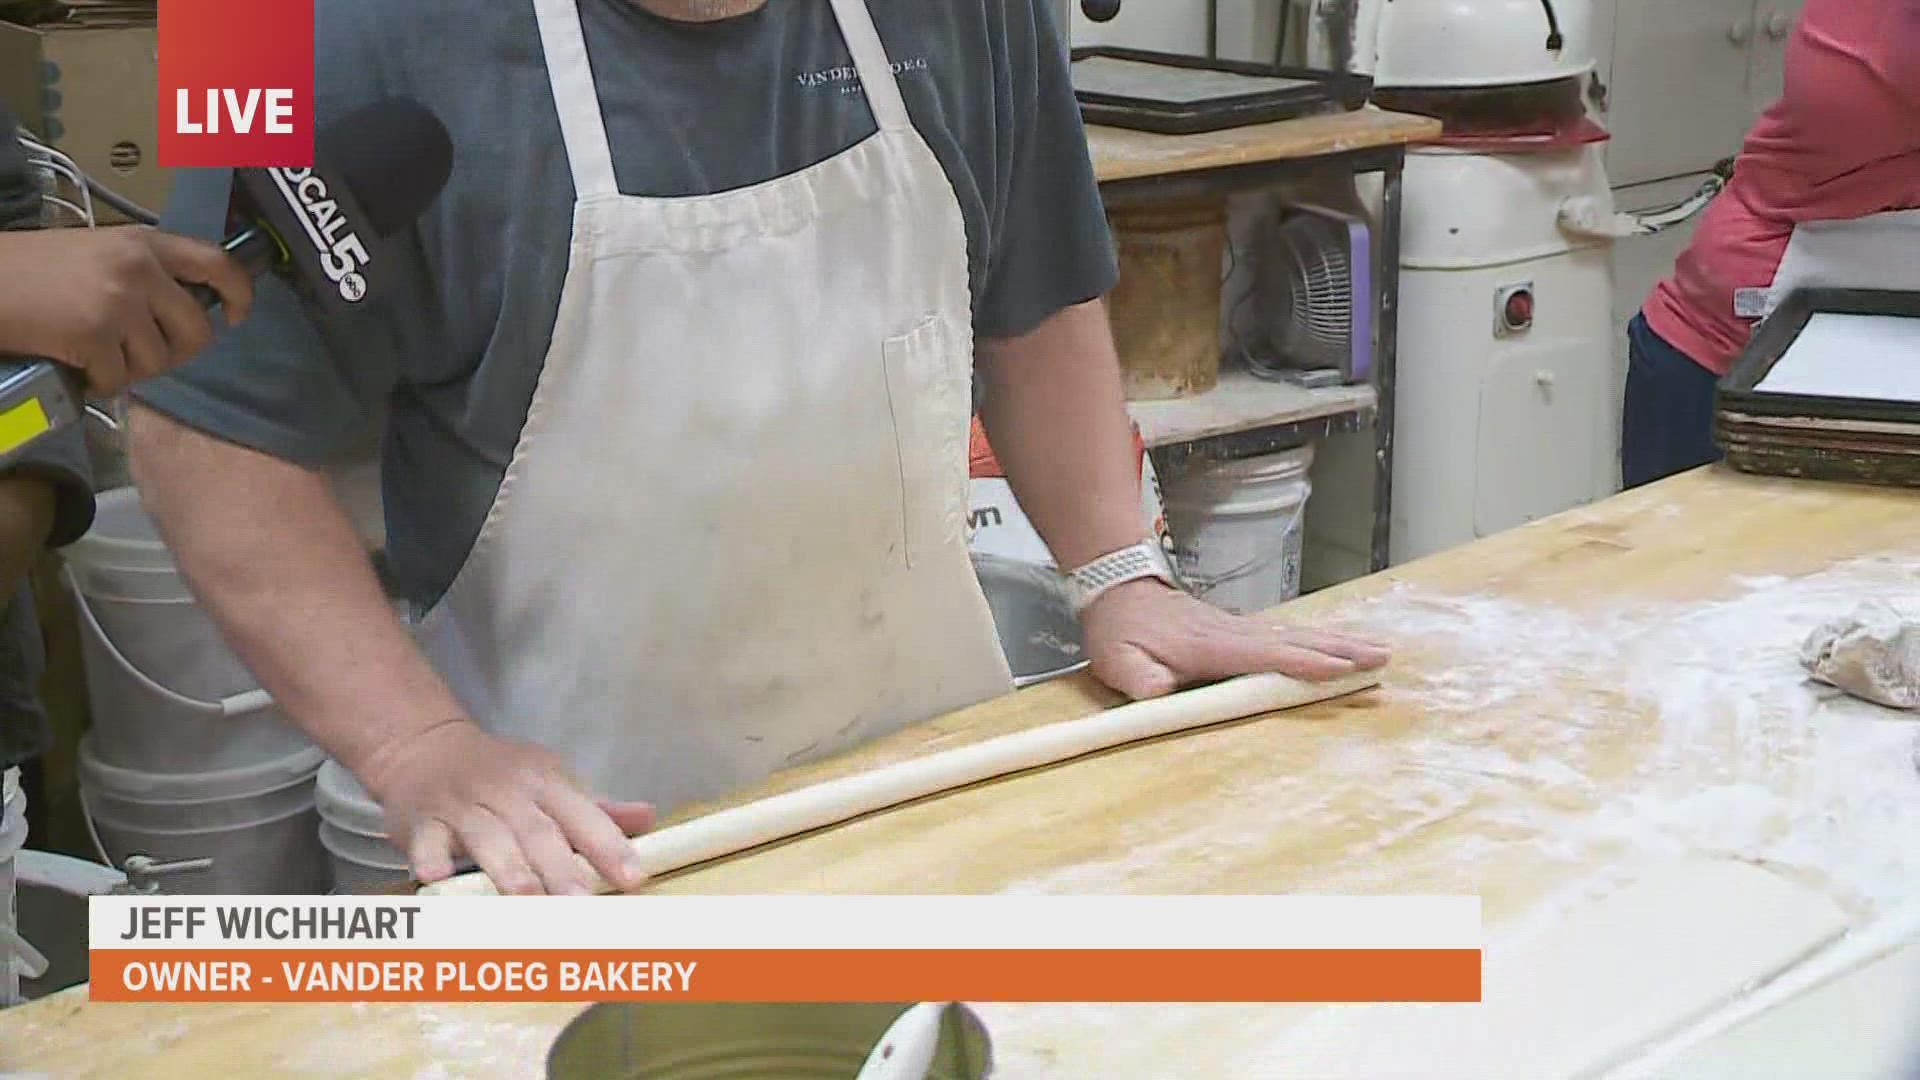 Local 5's Khalil Maycock brings you inside the Vander Ploeg Bakery where delicious preparations are underway for Pella's annual festival.